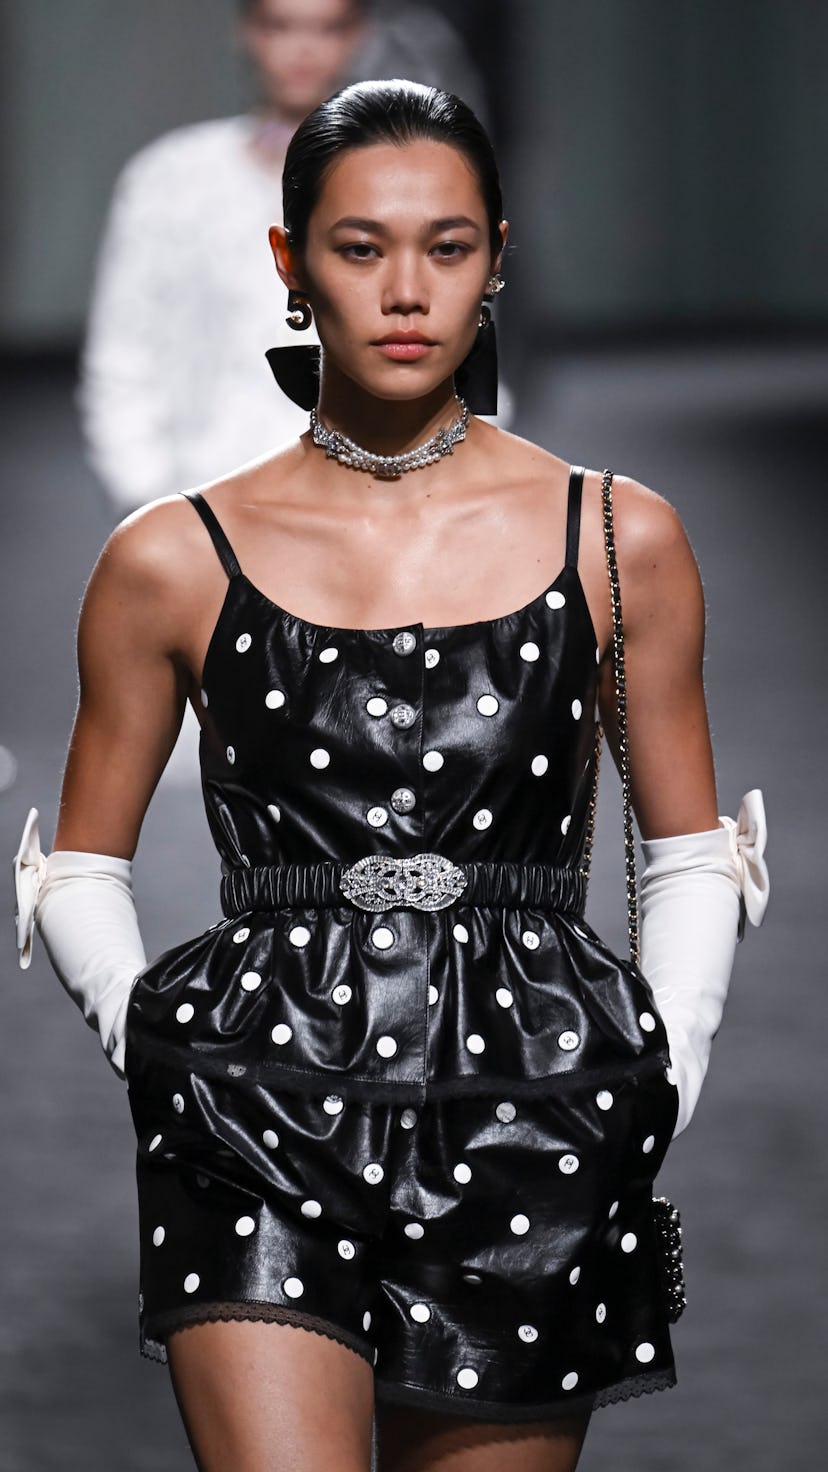 PARIS, FRANCE - OCTOBER 04: A model walks the runway during the Chanel Ready to Wear Spring/Summer 2...